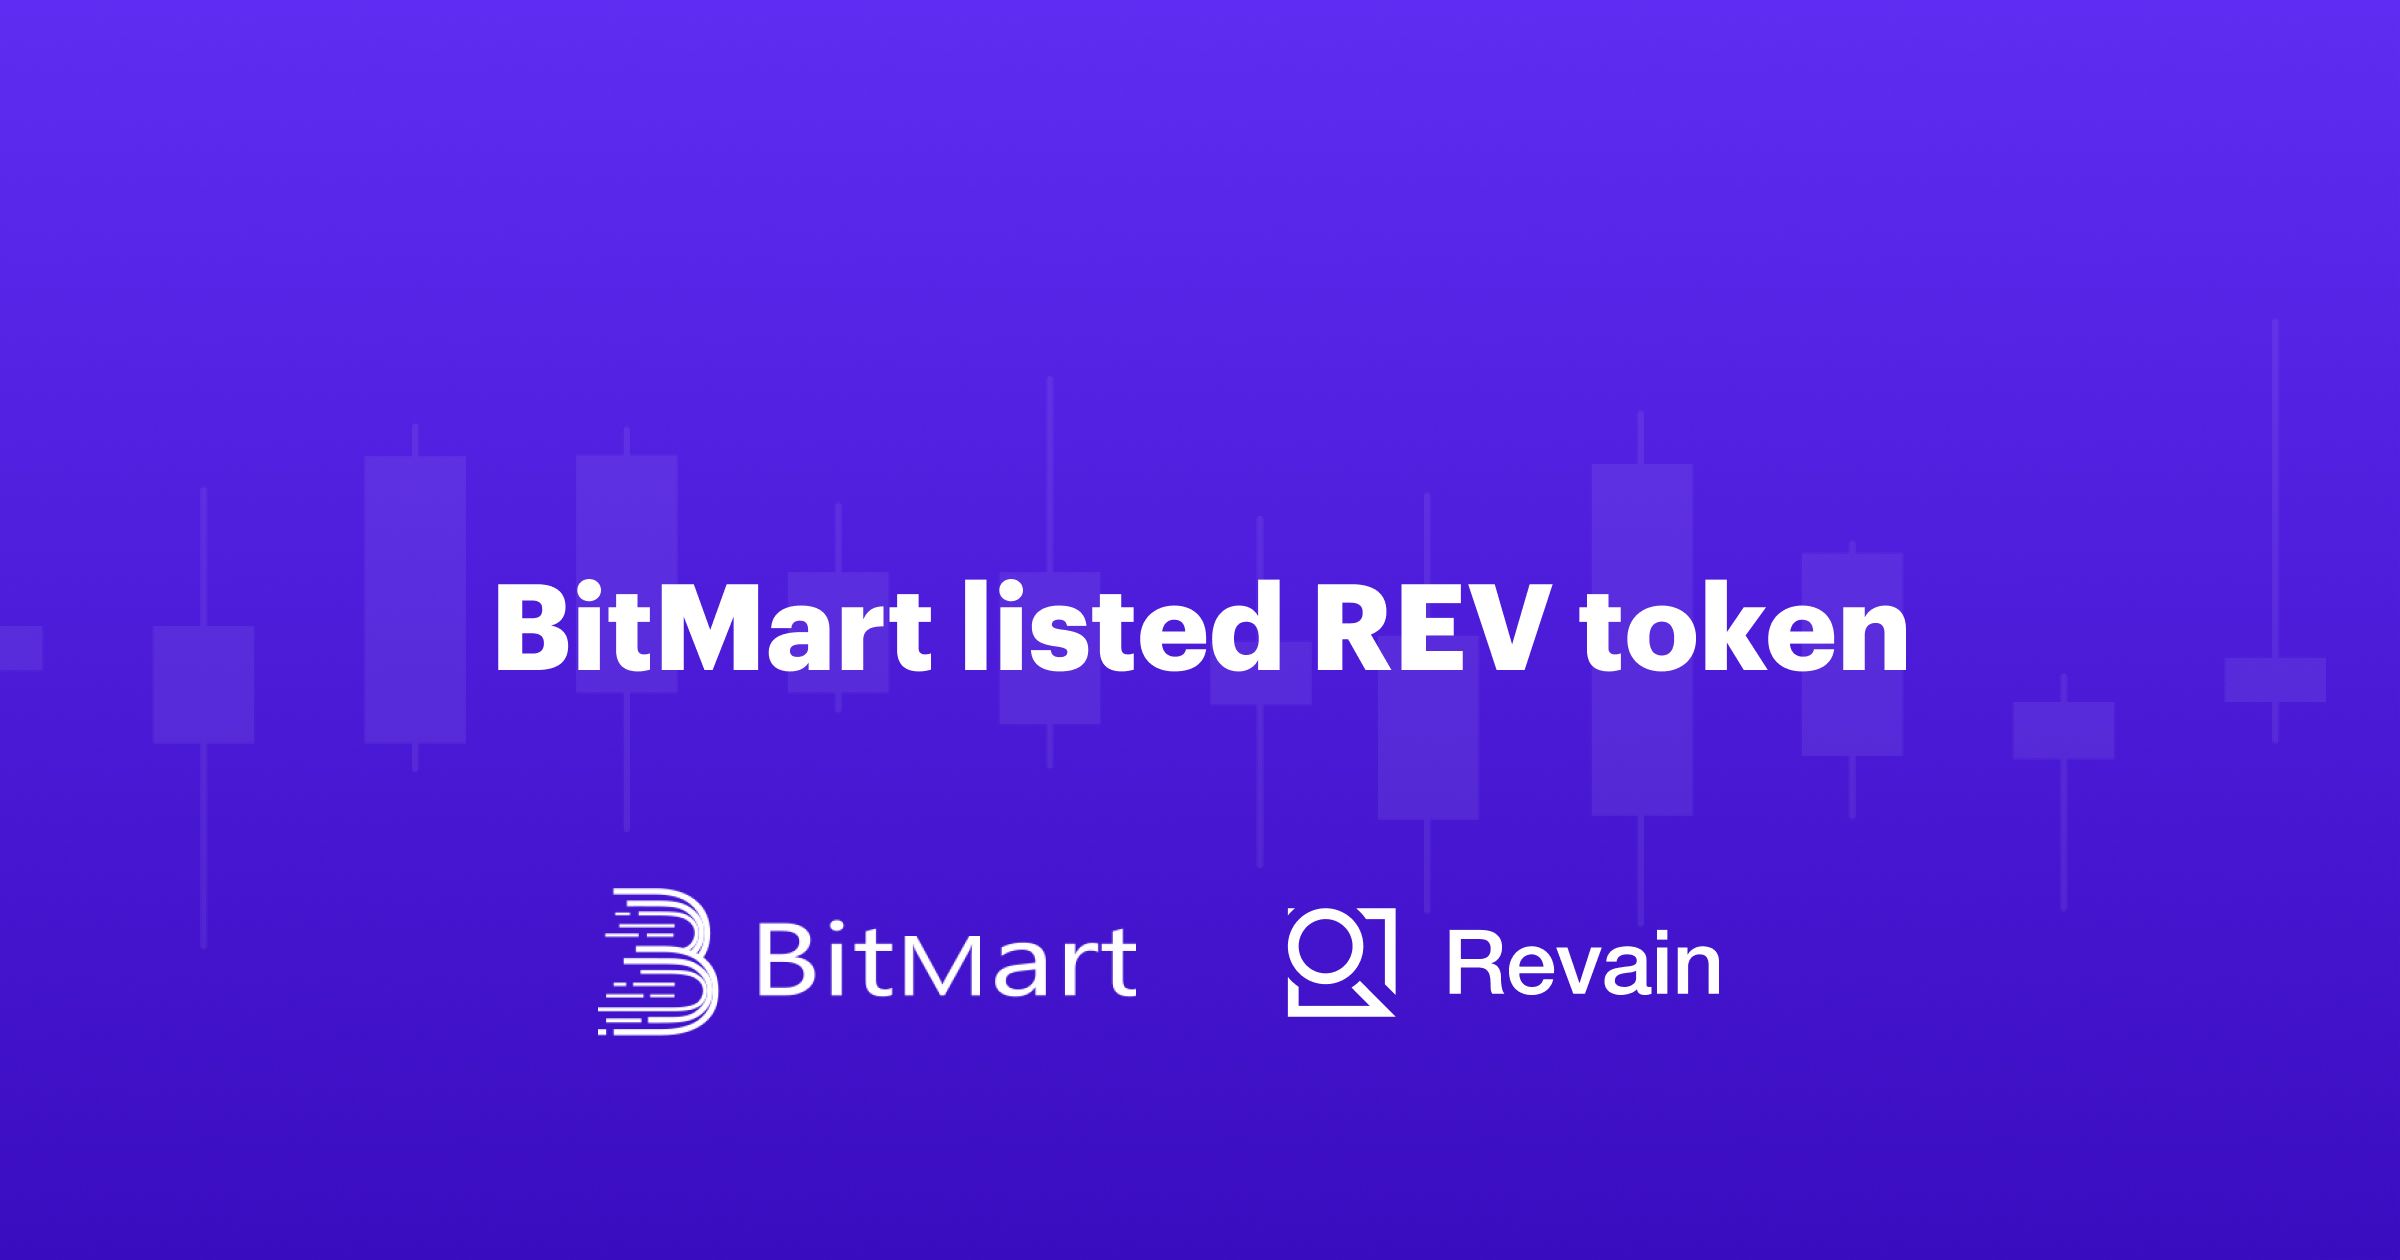 Revain is listed on the BitMart exchange